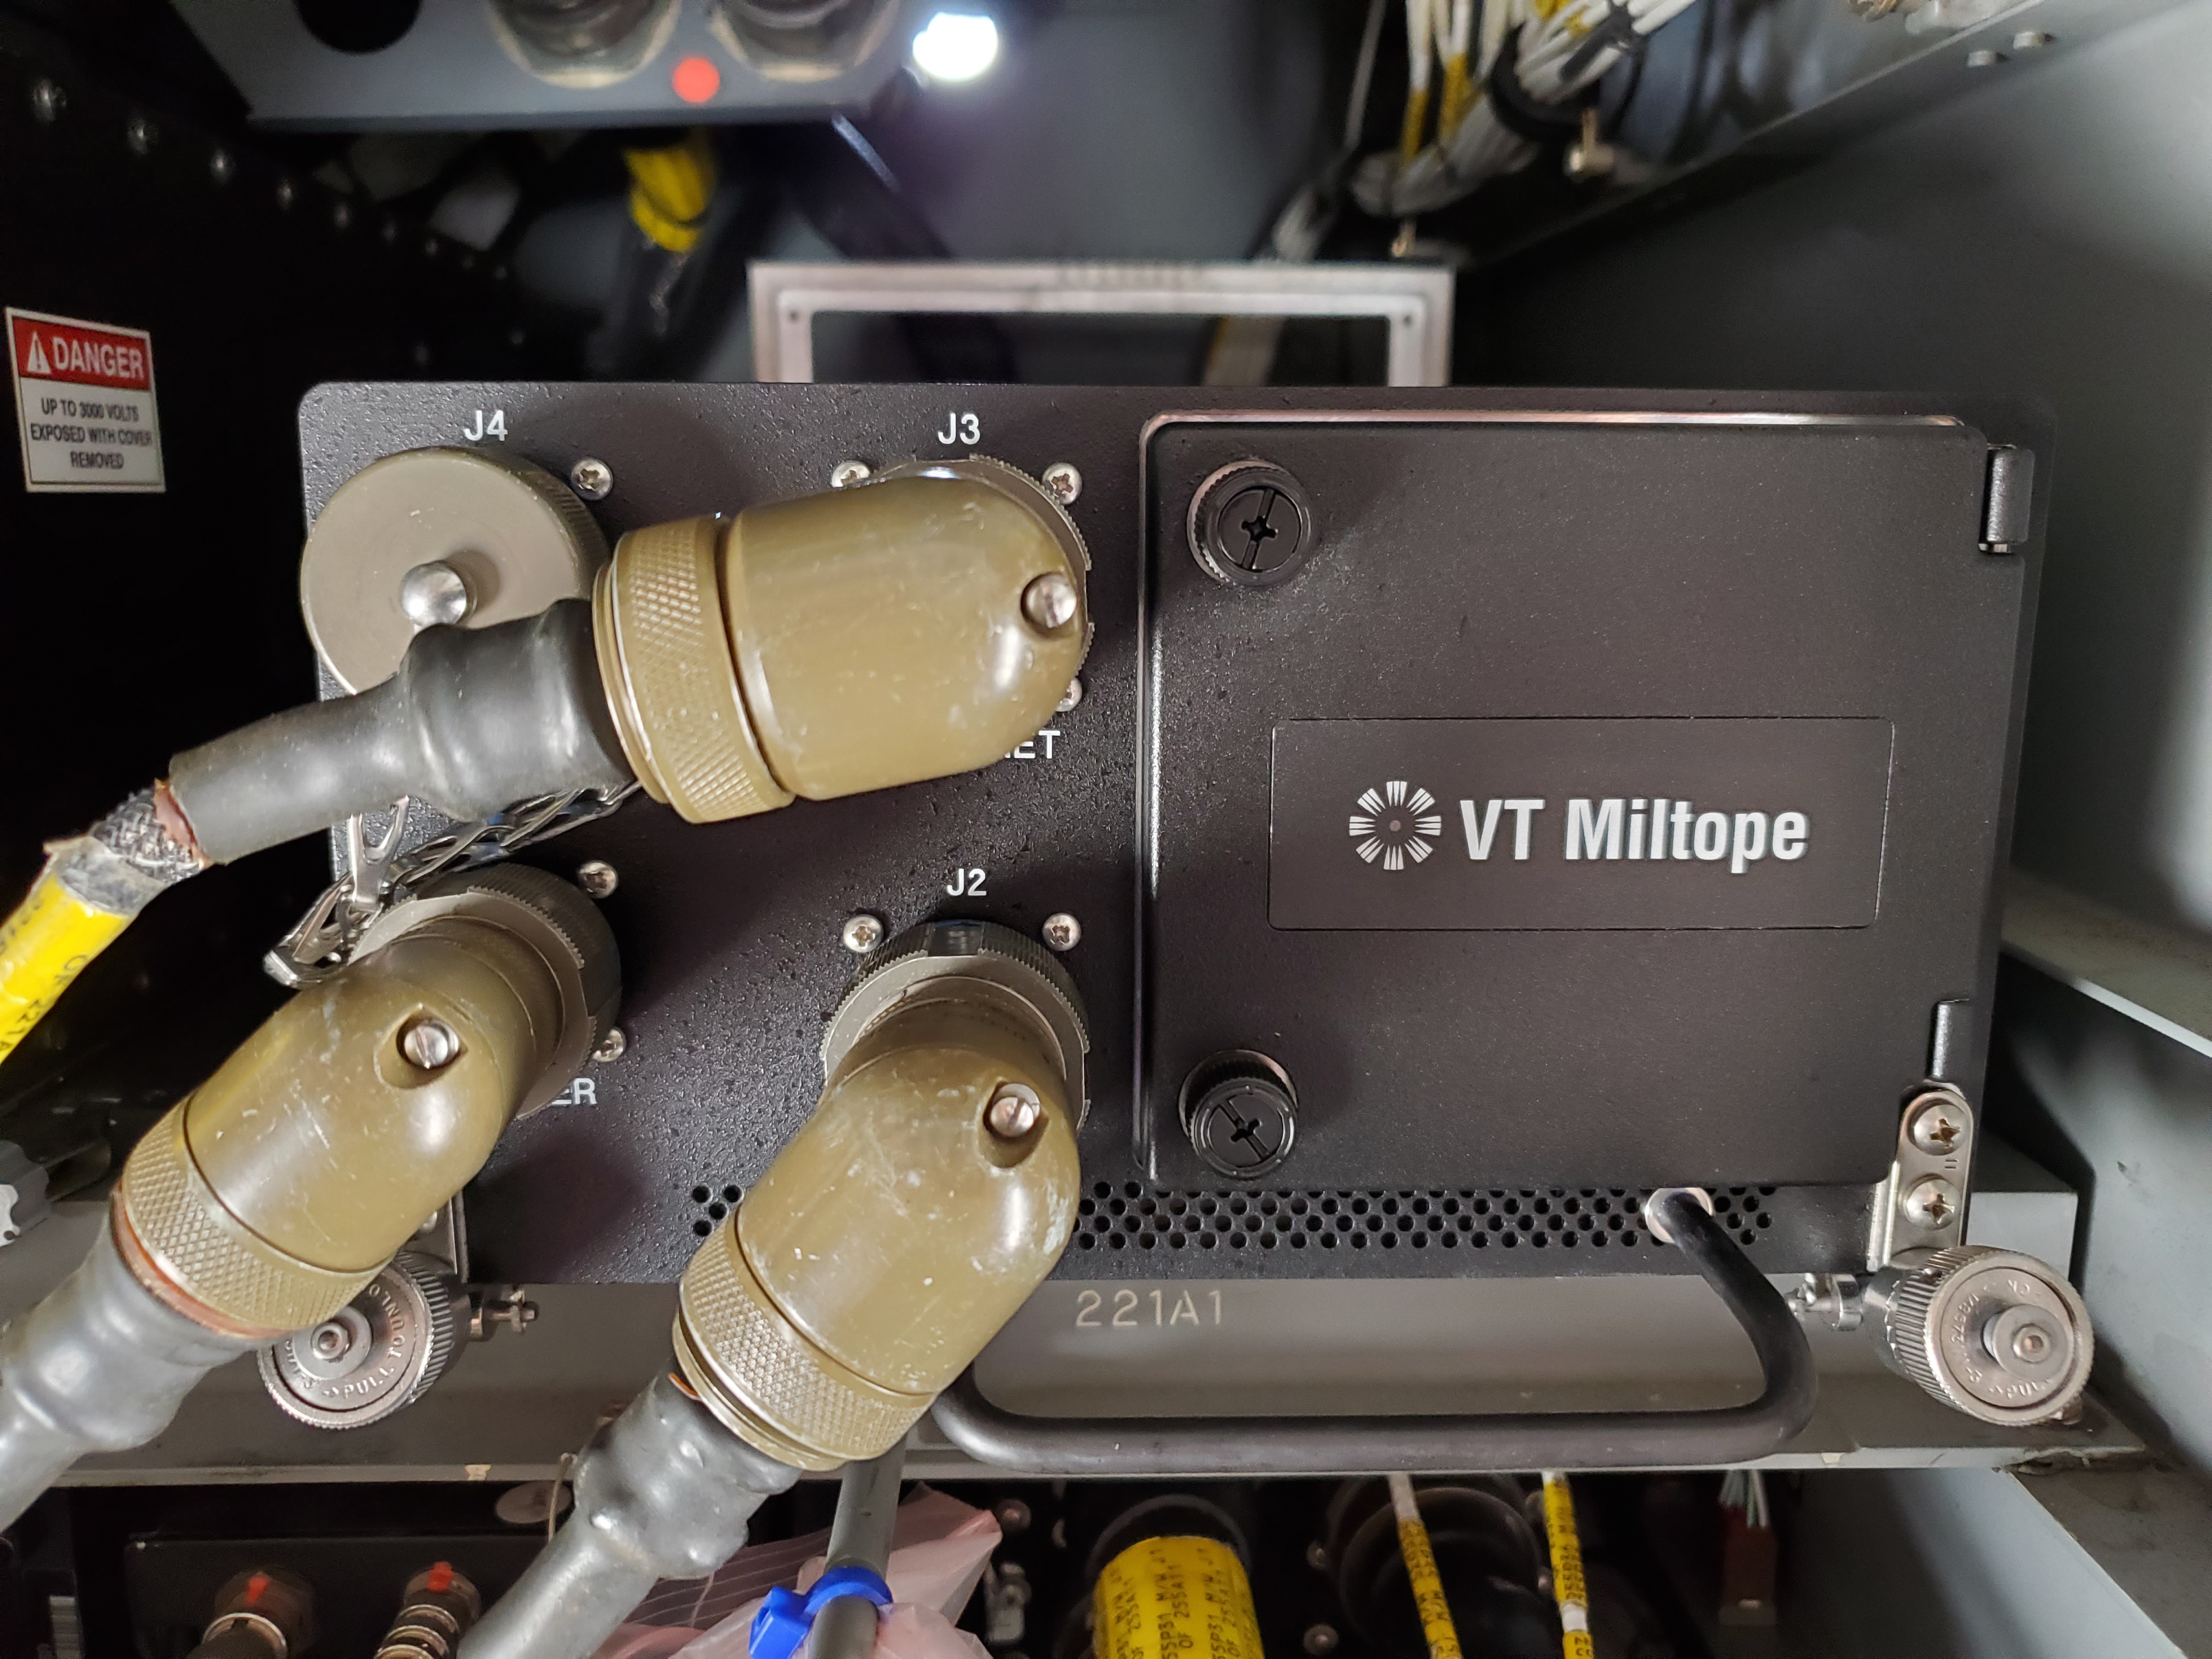 Make sure dust cap’s installed on MMS-II J4 connector when placed in avionics closet